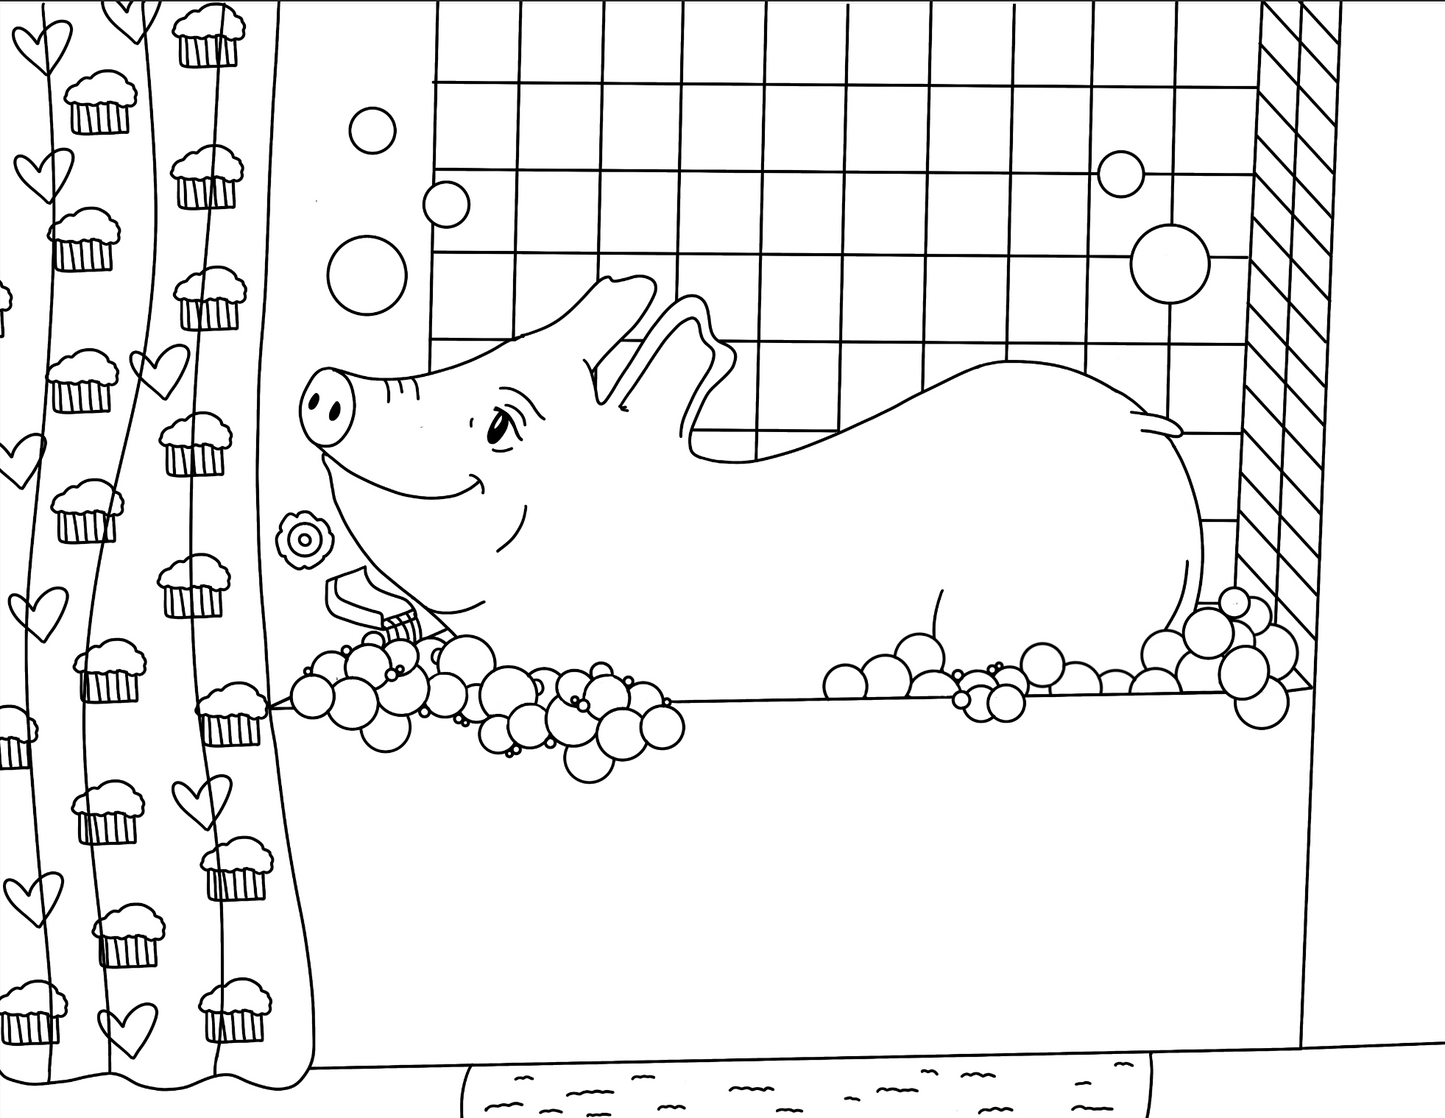 NEW- Esther The Wonder Pig- Colouring book- 22 pages